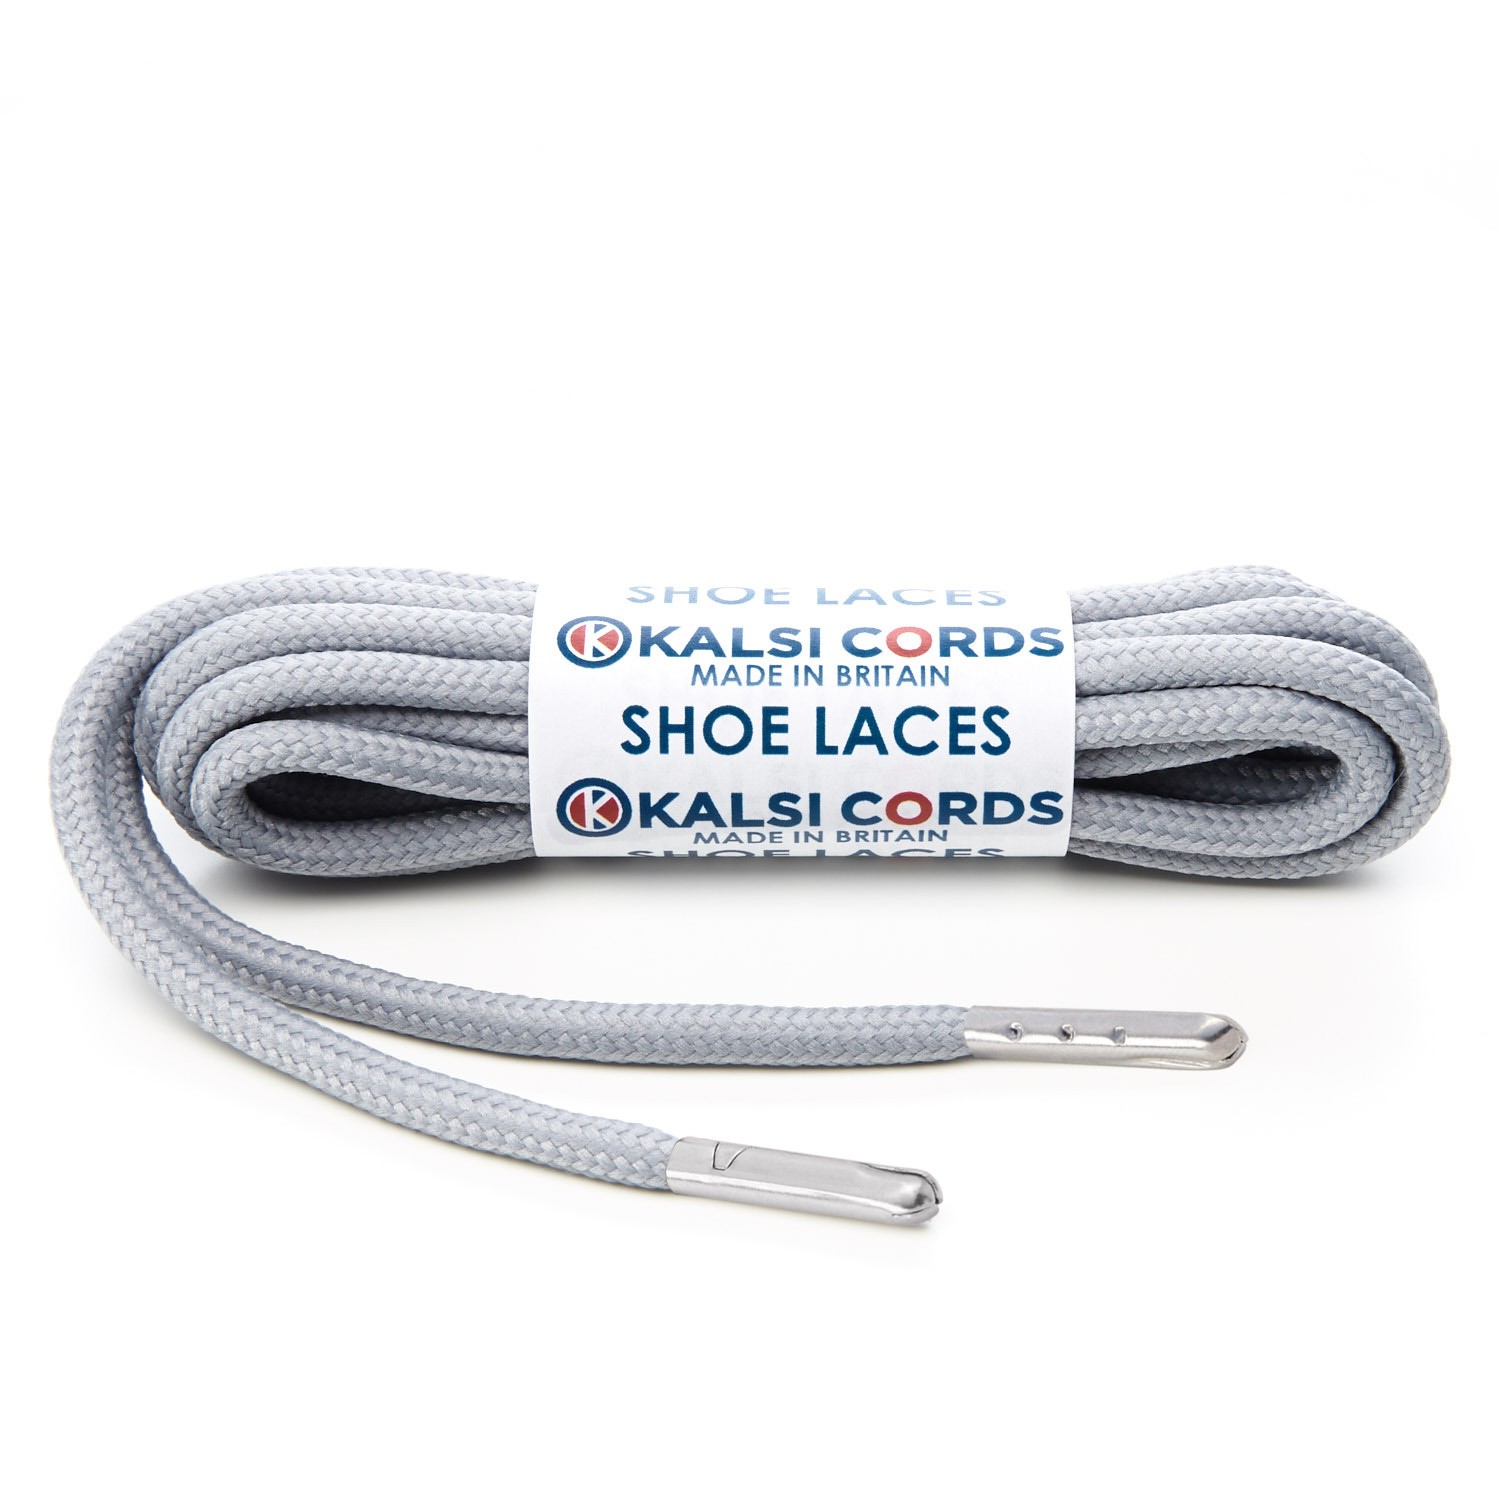 T621 5mm Round Polyester Shoe Laces Frosted Silver 1 Silver Metal Tip Kalsi Cords